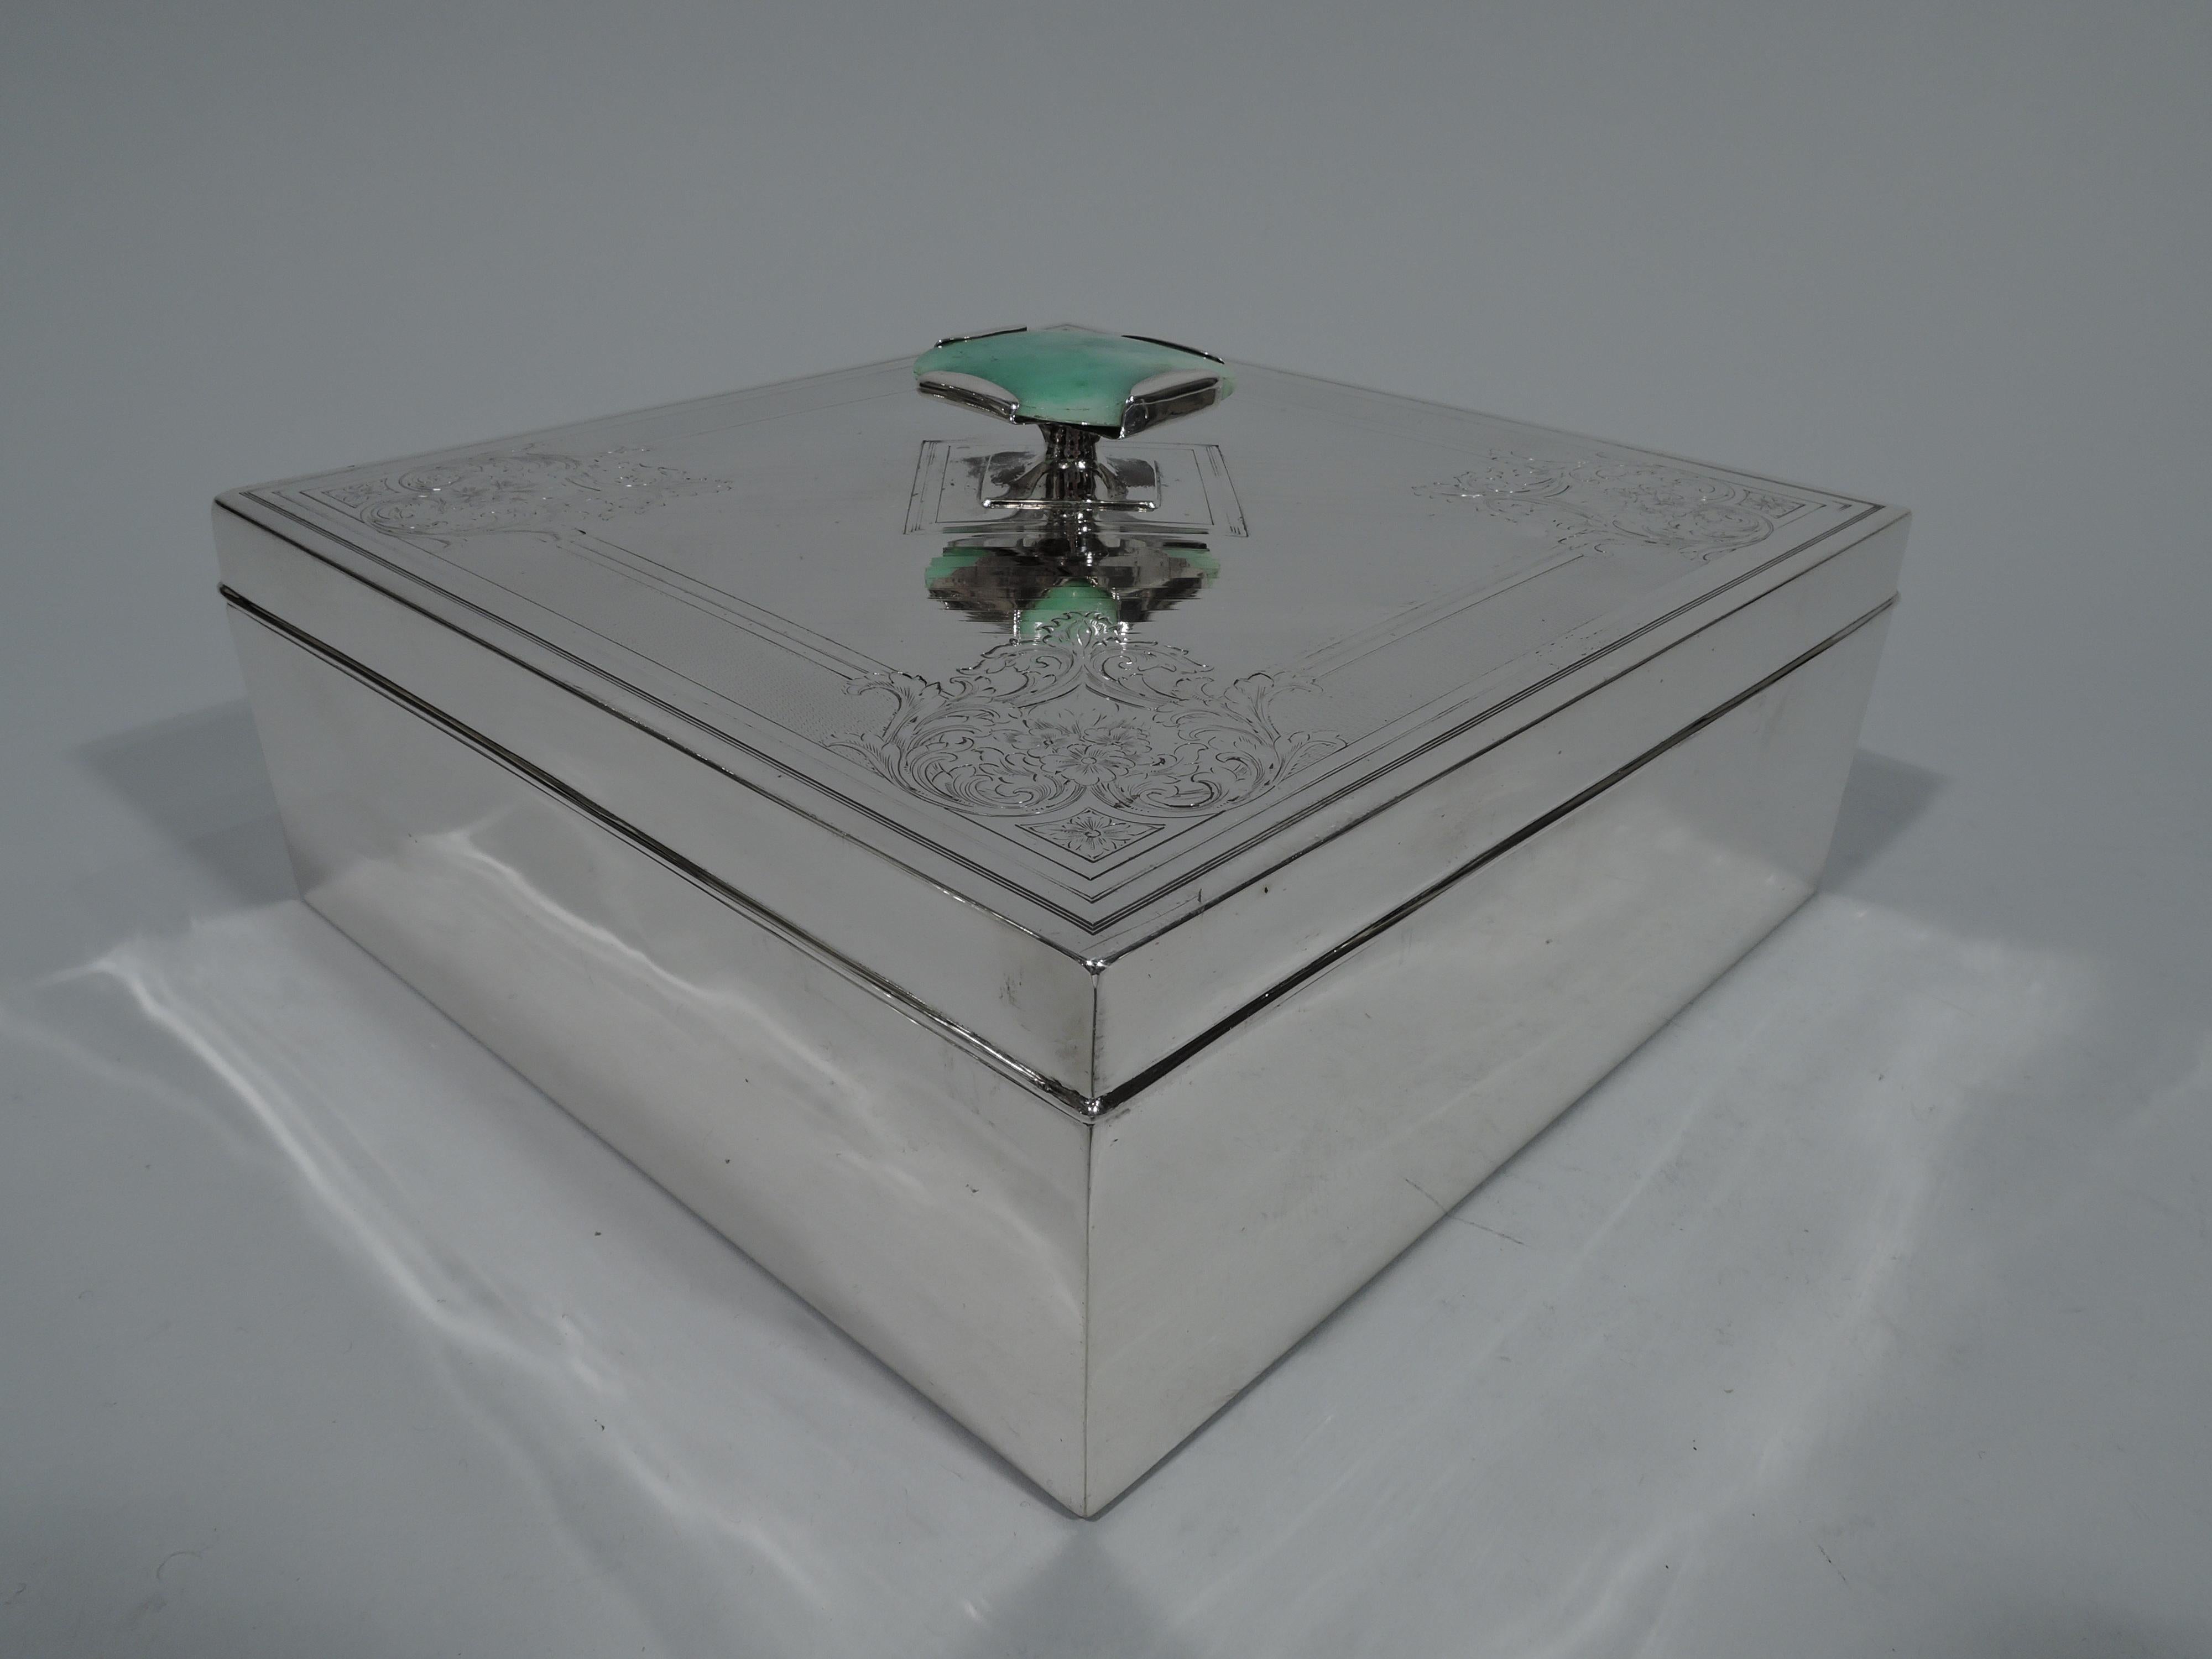 Edwardian sterling silver keepsake box. Square with straight sides and sharp corners. Cover flat with engine-turned ornament, diagonal lines bordered by dense waving. Corners have engraved scrolls and flowers. Mottled green agate finial. Fully